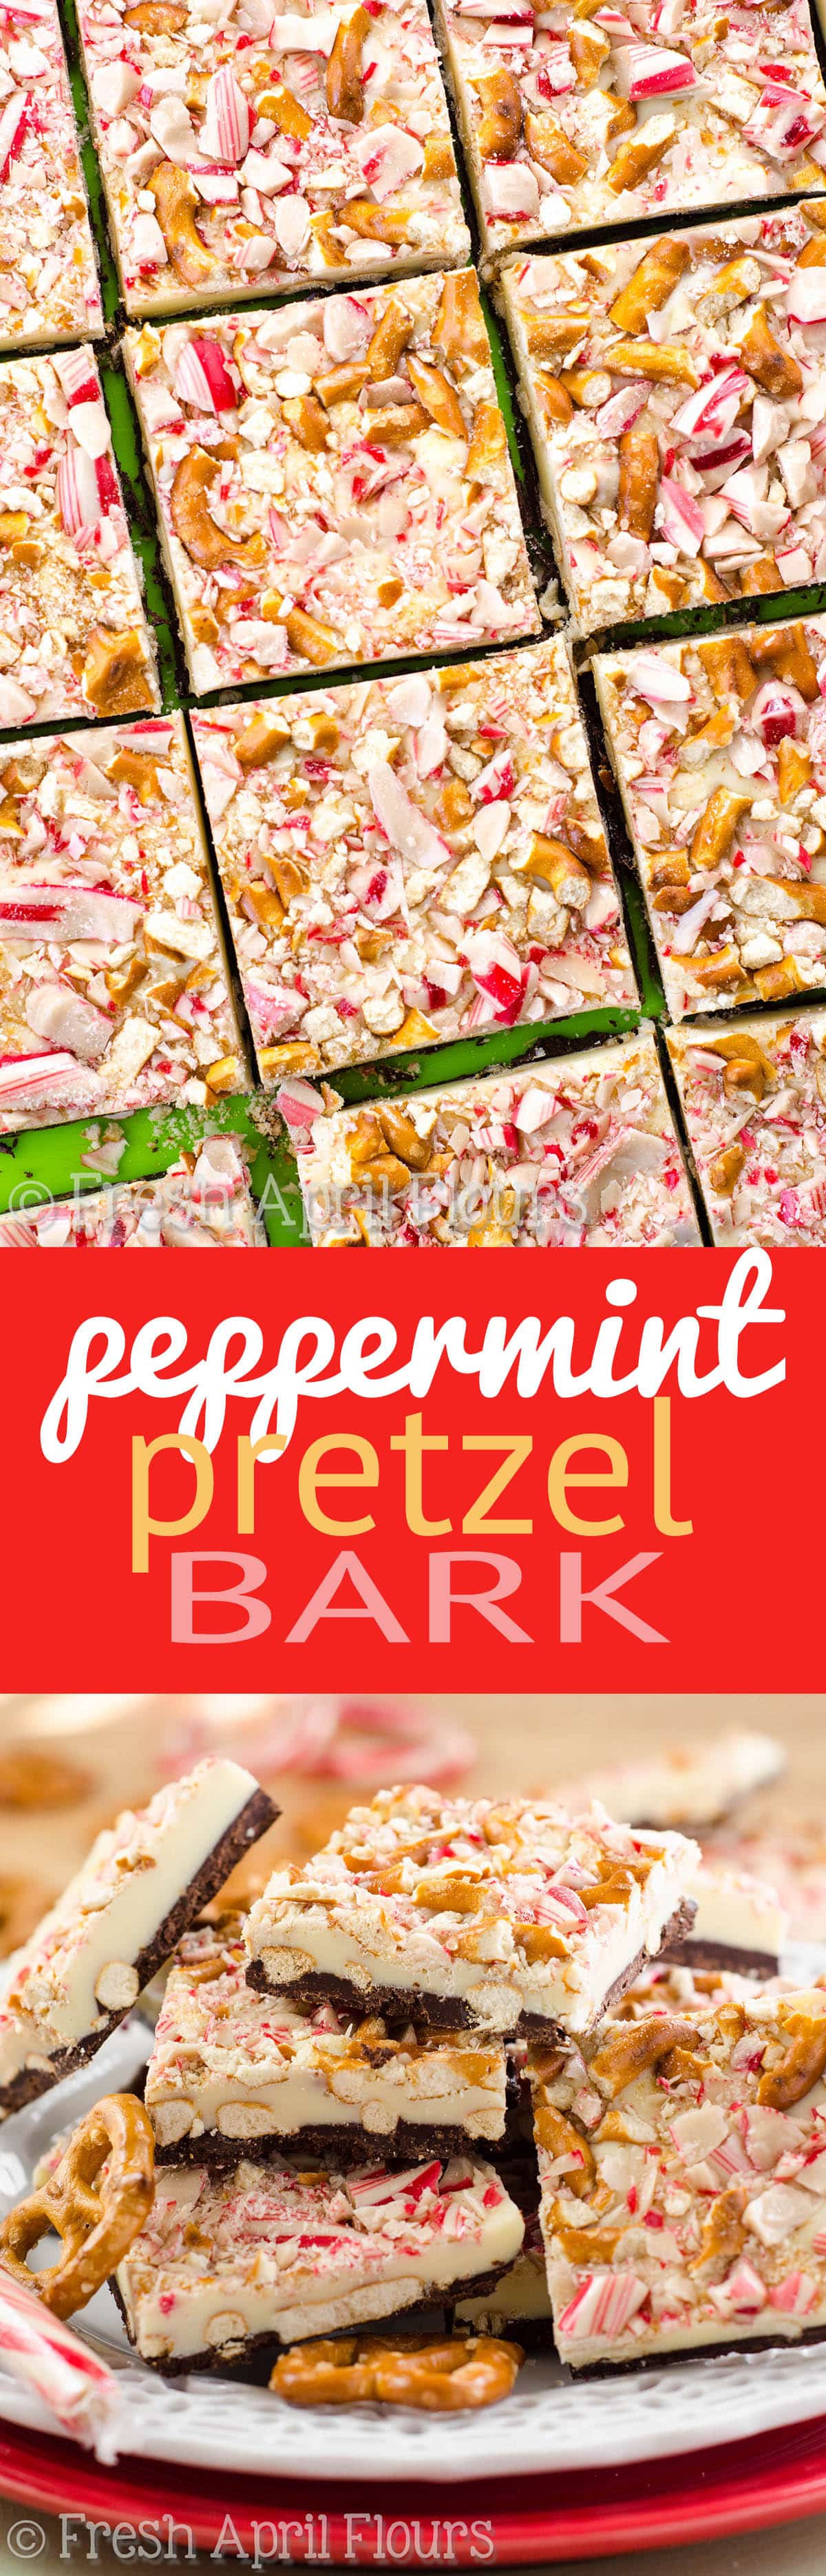 Give classic peppermint bark a salty twist this year with pretzel pieces! Perfect for cookie trays and homemade gifts. via @frshaprilflours